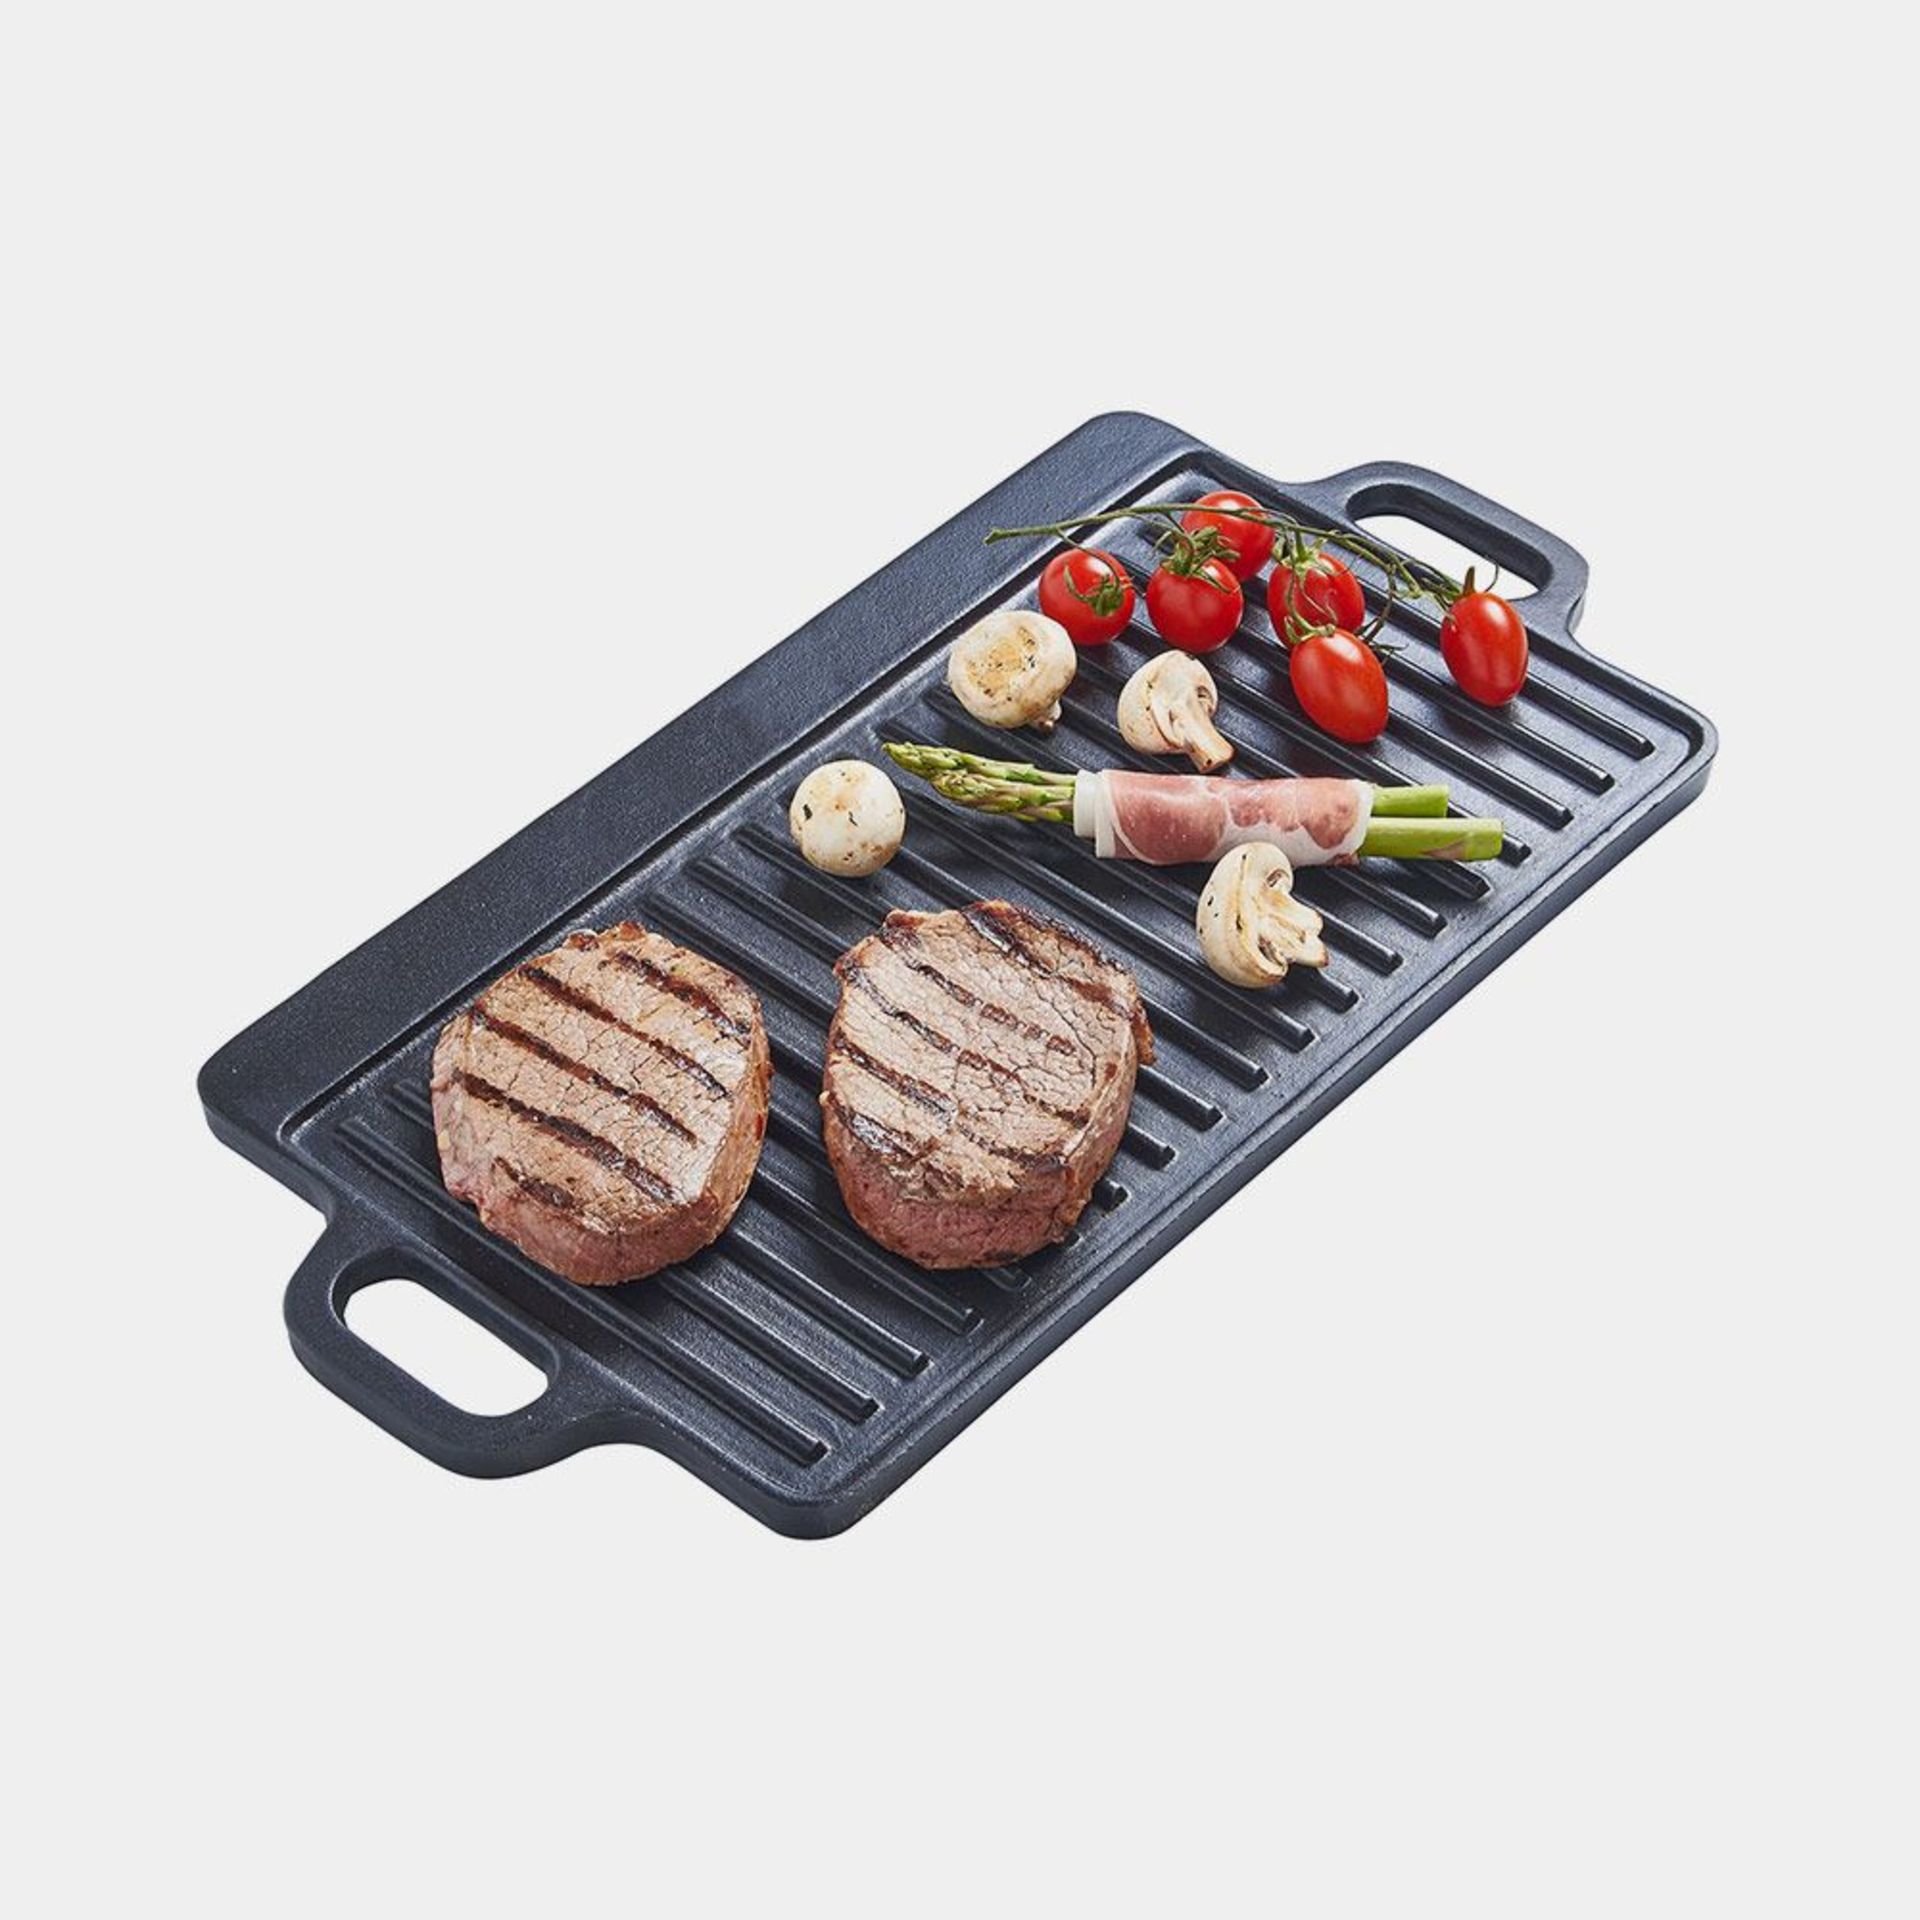 37cm Cast Iron Griddle. - BI. Versatile, multi-functional and a fun way to cook, the griddle is